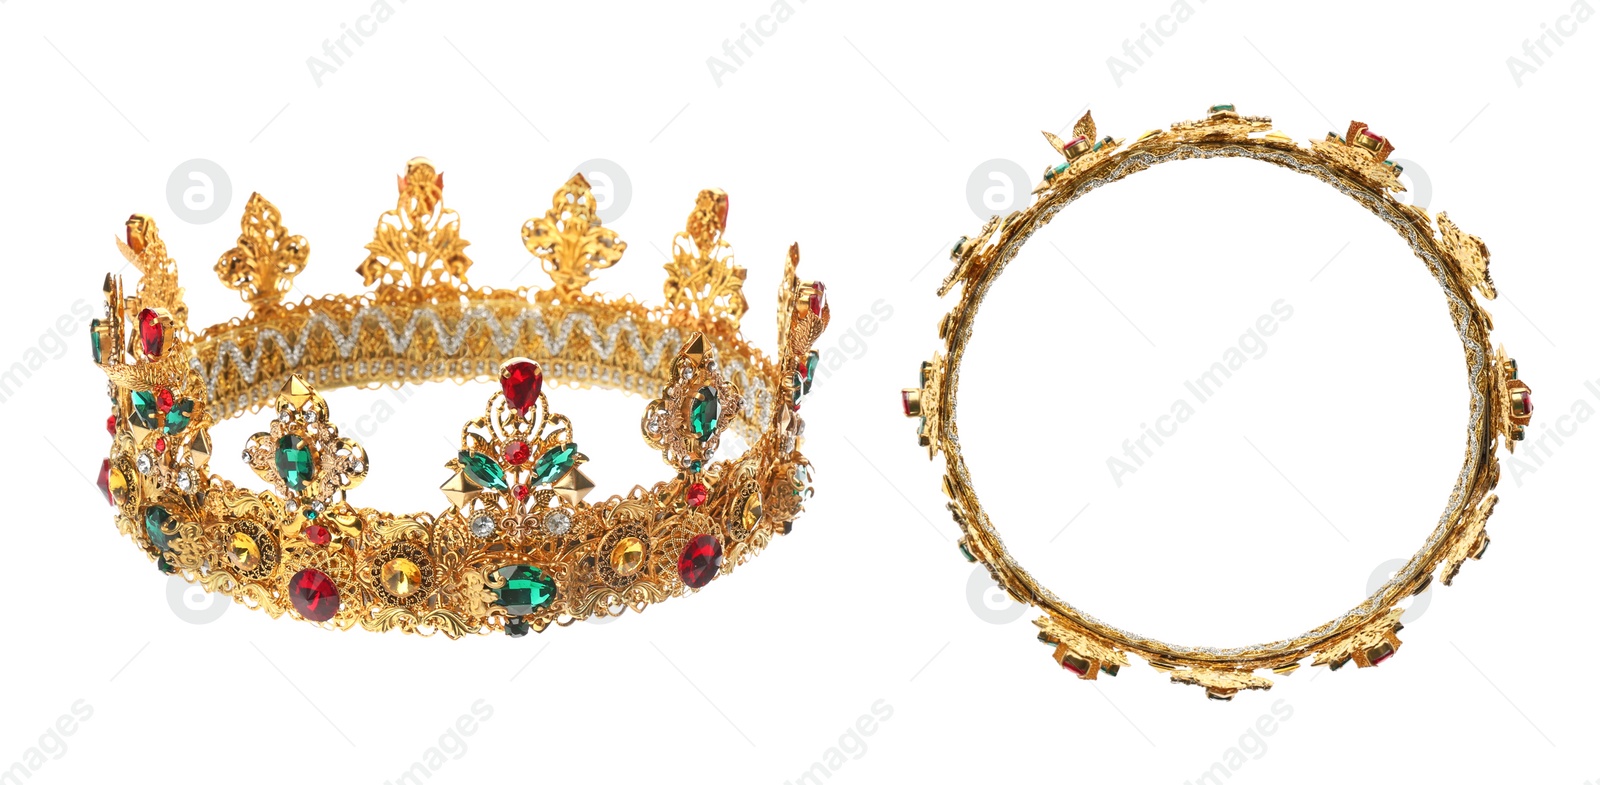 Image of Beautiful crown with gemstones on white background, side and top views